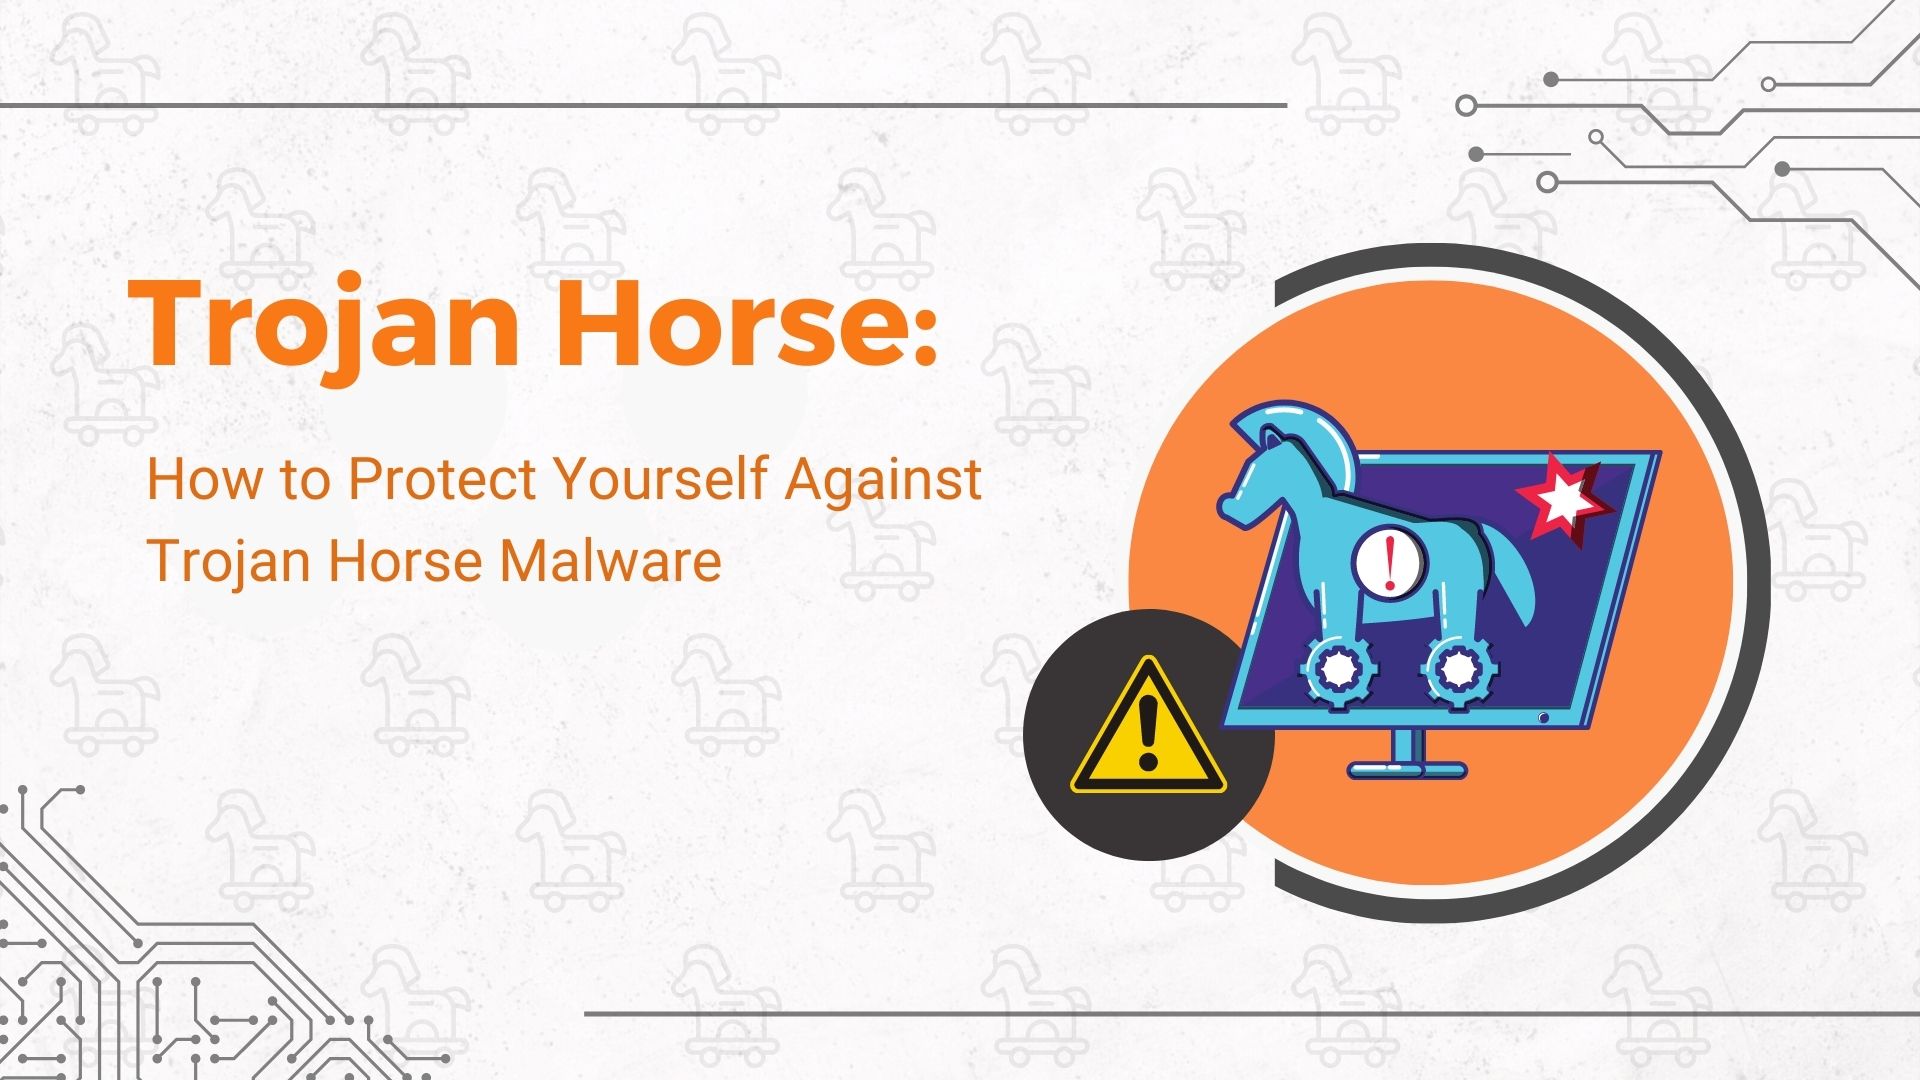 1. Trojan Horse: btwtracepktwpp.exe may be disguised as a legitimate file, but it could actually be a Trojan horse designed to steal sensitive information or grant unauthorized access to your system.
2. Keylogger: This executable file can potentially be a keylogger that records your keystrokes, including sensitive information such as passwords, credit card numbers, and personal messages.